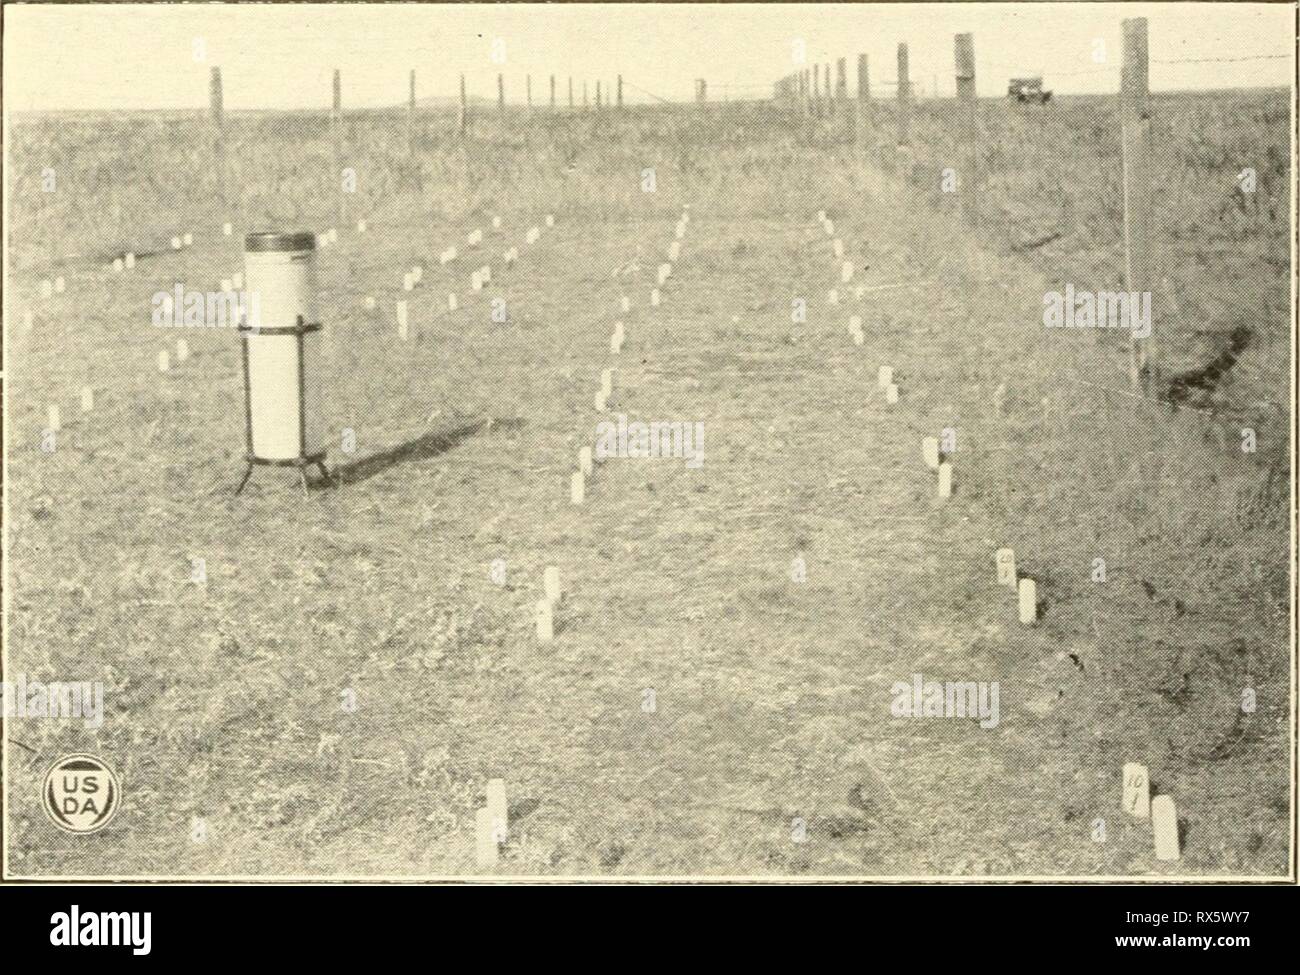 Effects of different systems and Effects of different systems and intensities of grazing upon the native vegetation at the Northern Great Plains Field Station effectsofdiffere1170sarv Year: 1923  Fig. I.—Close View of a Single Plant of Artemisia frigida in the 30-Acre Pasture. Tin plani was in inches tall and had 36 flower stalks. This aff&lt; rds an idea of the size a single planl may attain. June, L920.   Fig. 2.—View of the Clipped Quadrats in the Isolation Transect of THE 100-ACRE PASTURE. The quadrat cut every 10 days is in the foreground. The duplicates are on the left. October, 191«J. Stock Photo